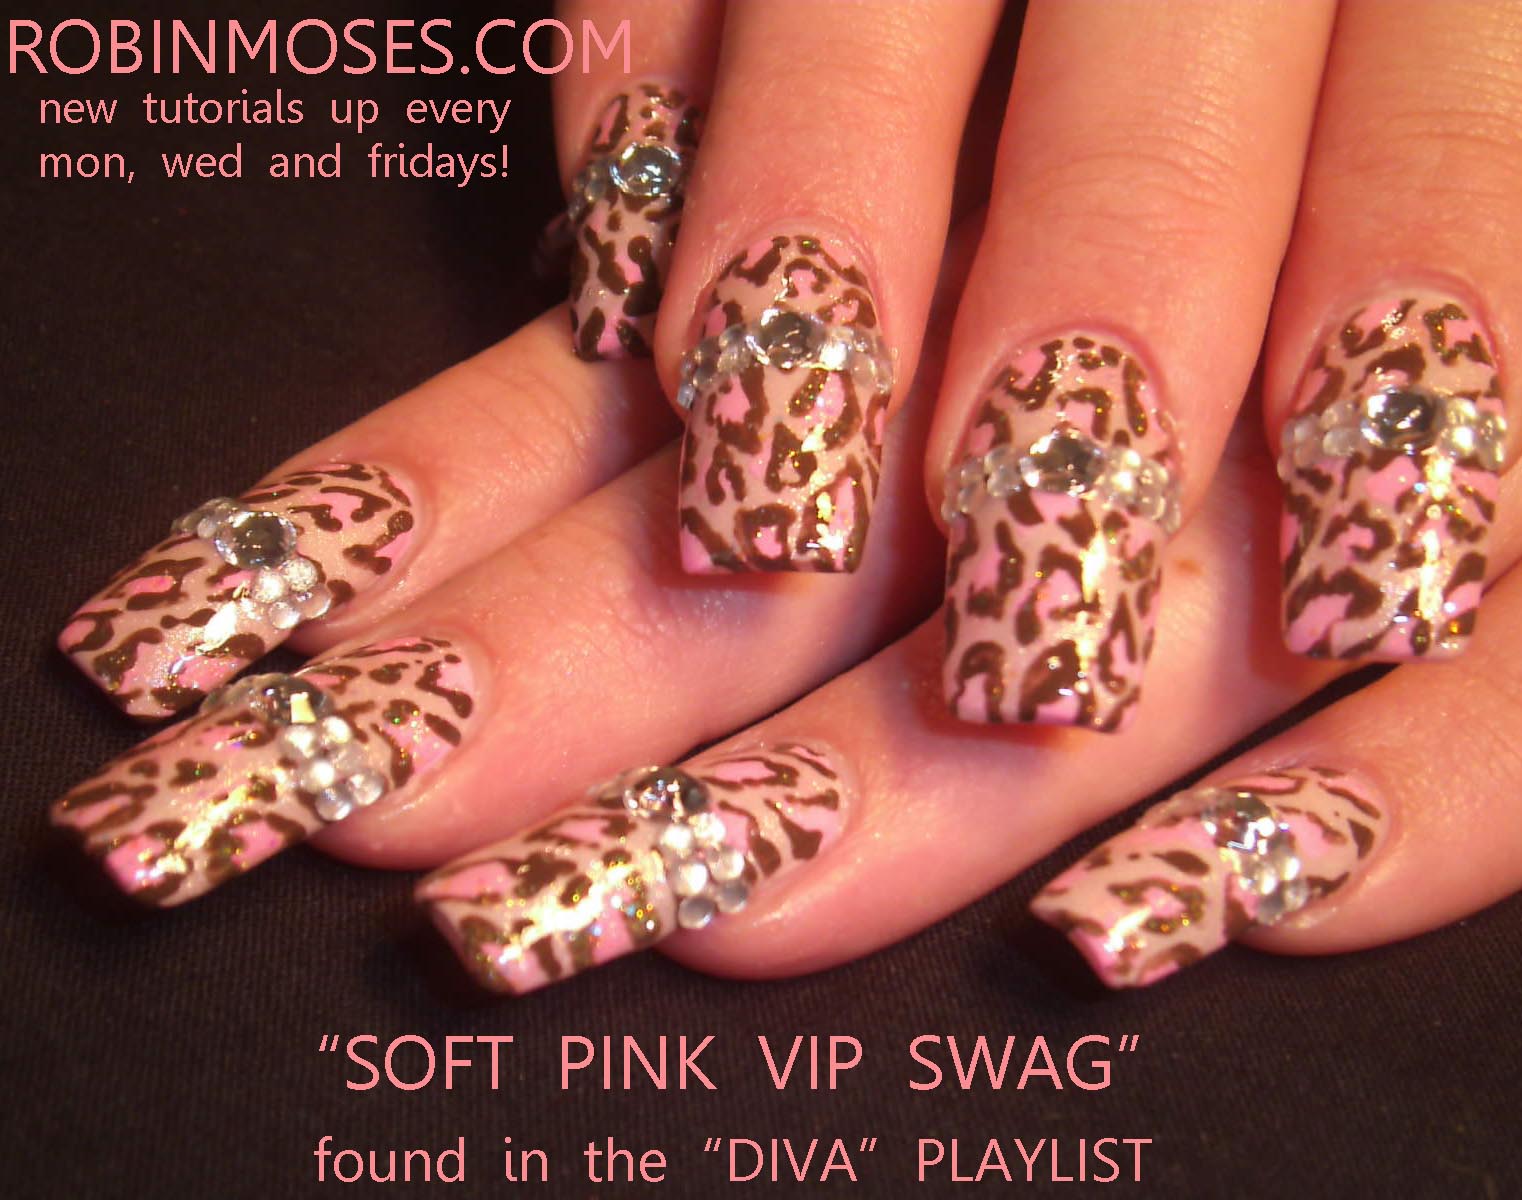 6. Black and Pink Floral Nail Art - wide 9